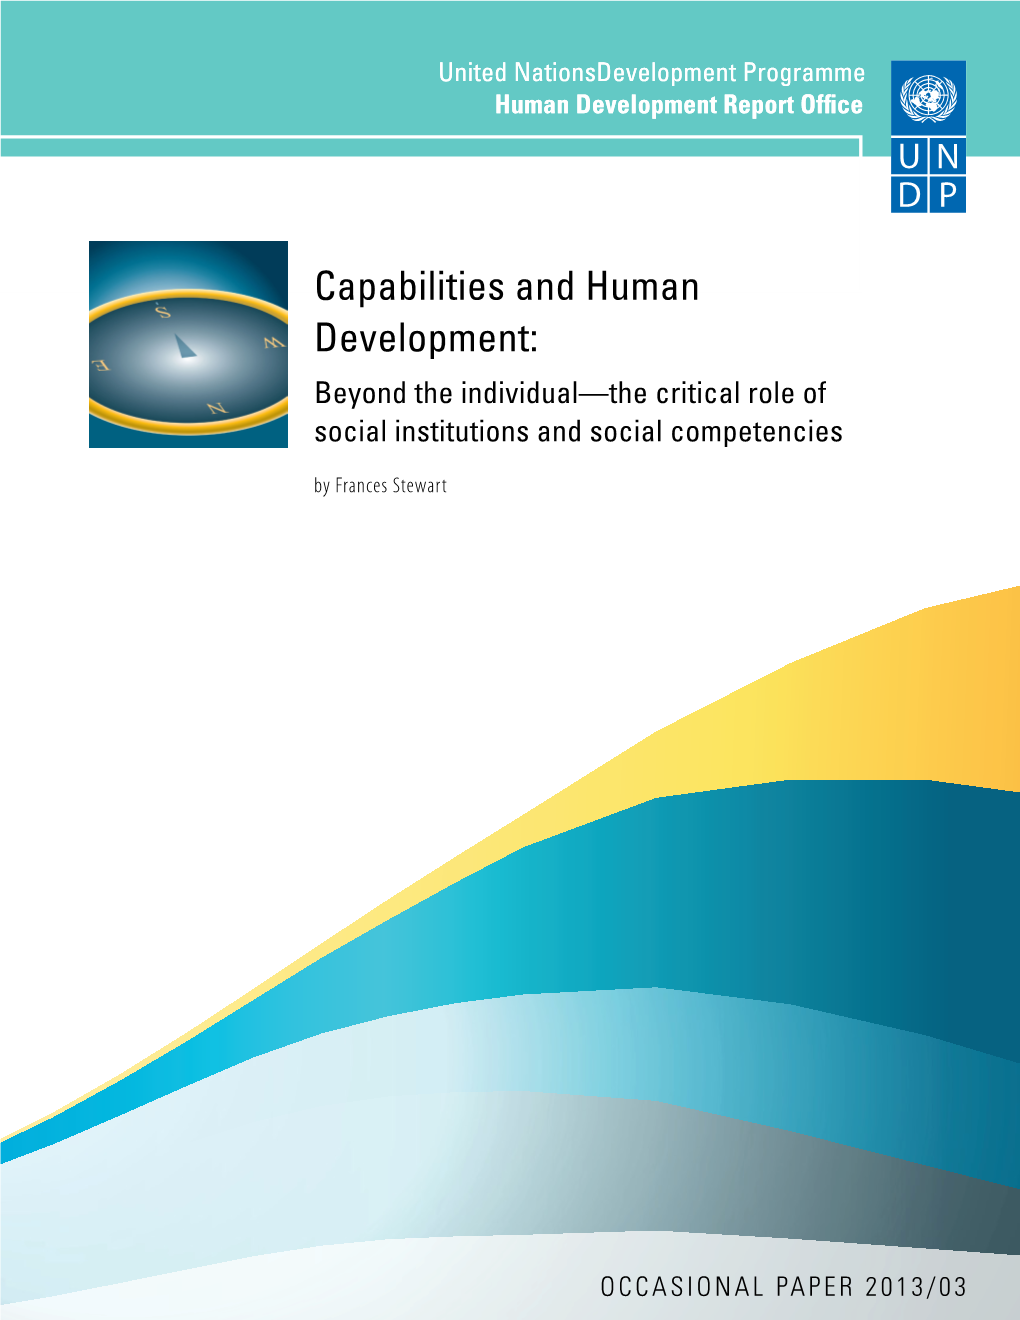 Capabilities and Human Development: Beyond the Individual—The Critical Role of Social Institutions and Social Competencies by Frances Stewart